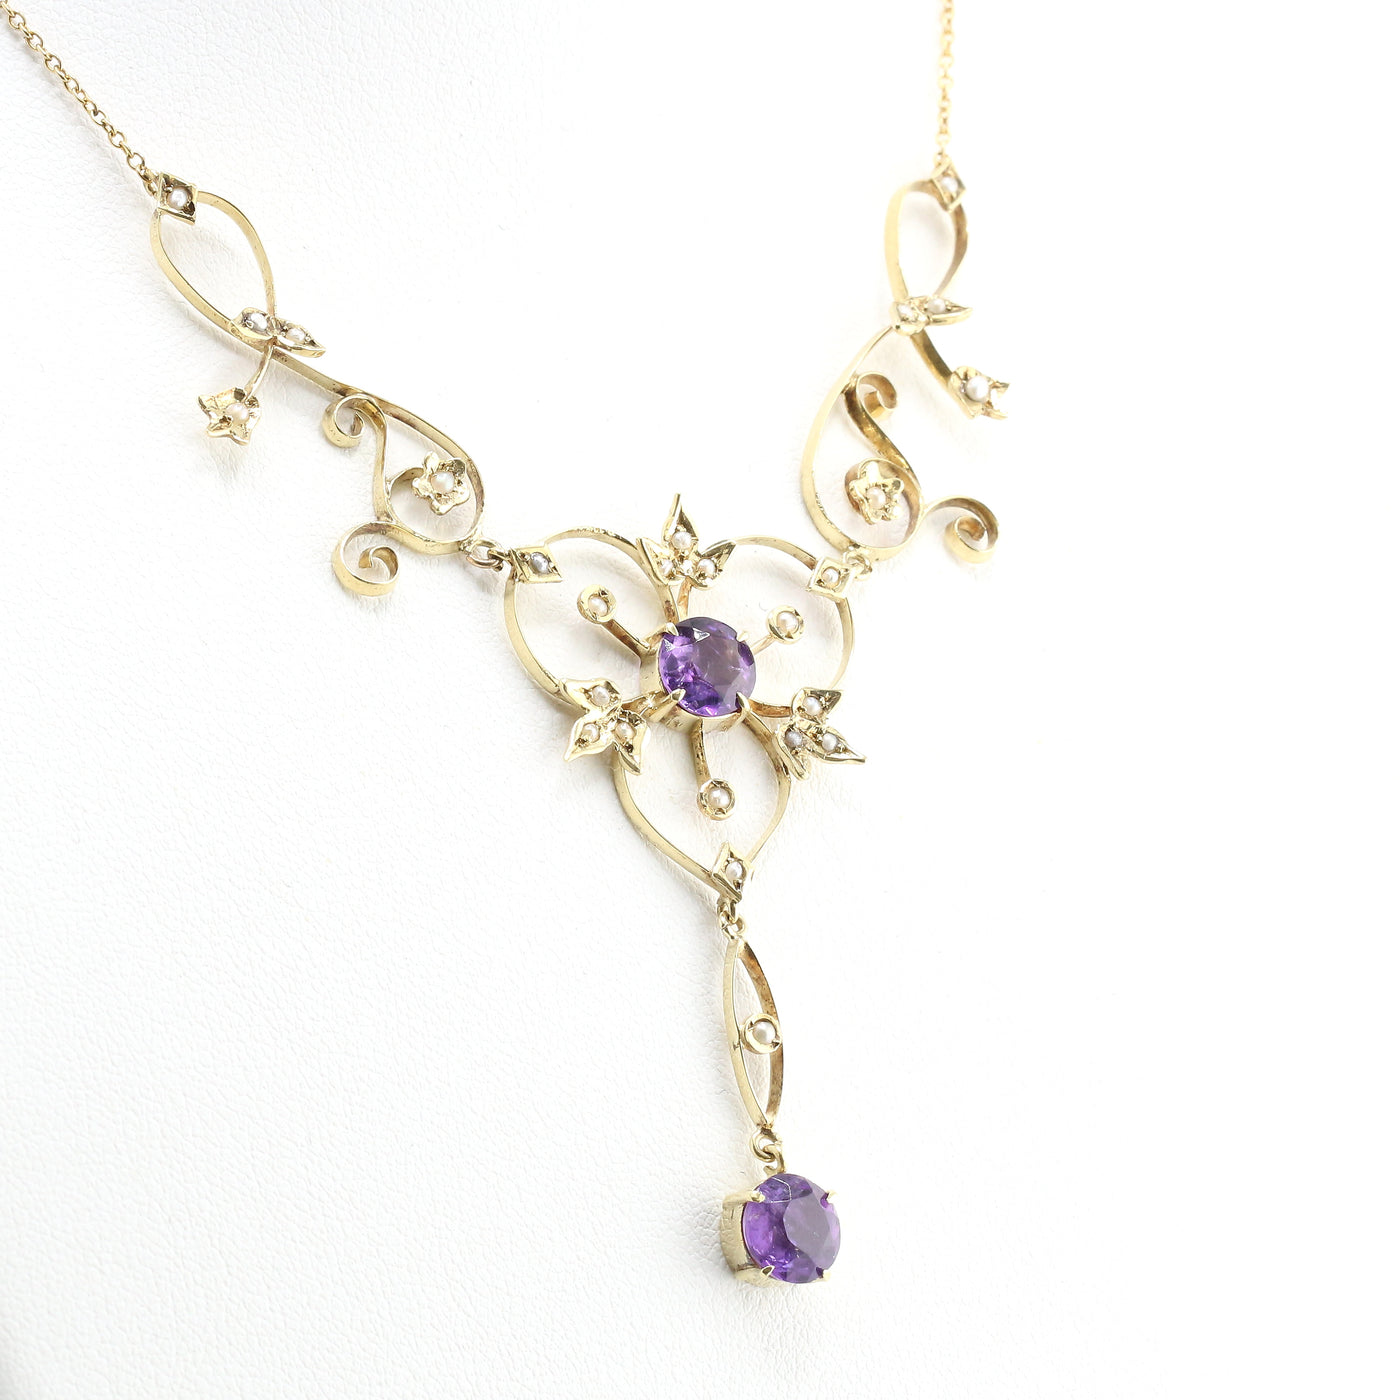 Amethyst & Seed Pearl Necklace